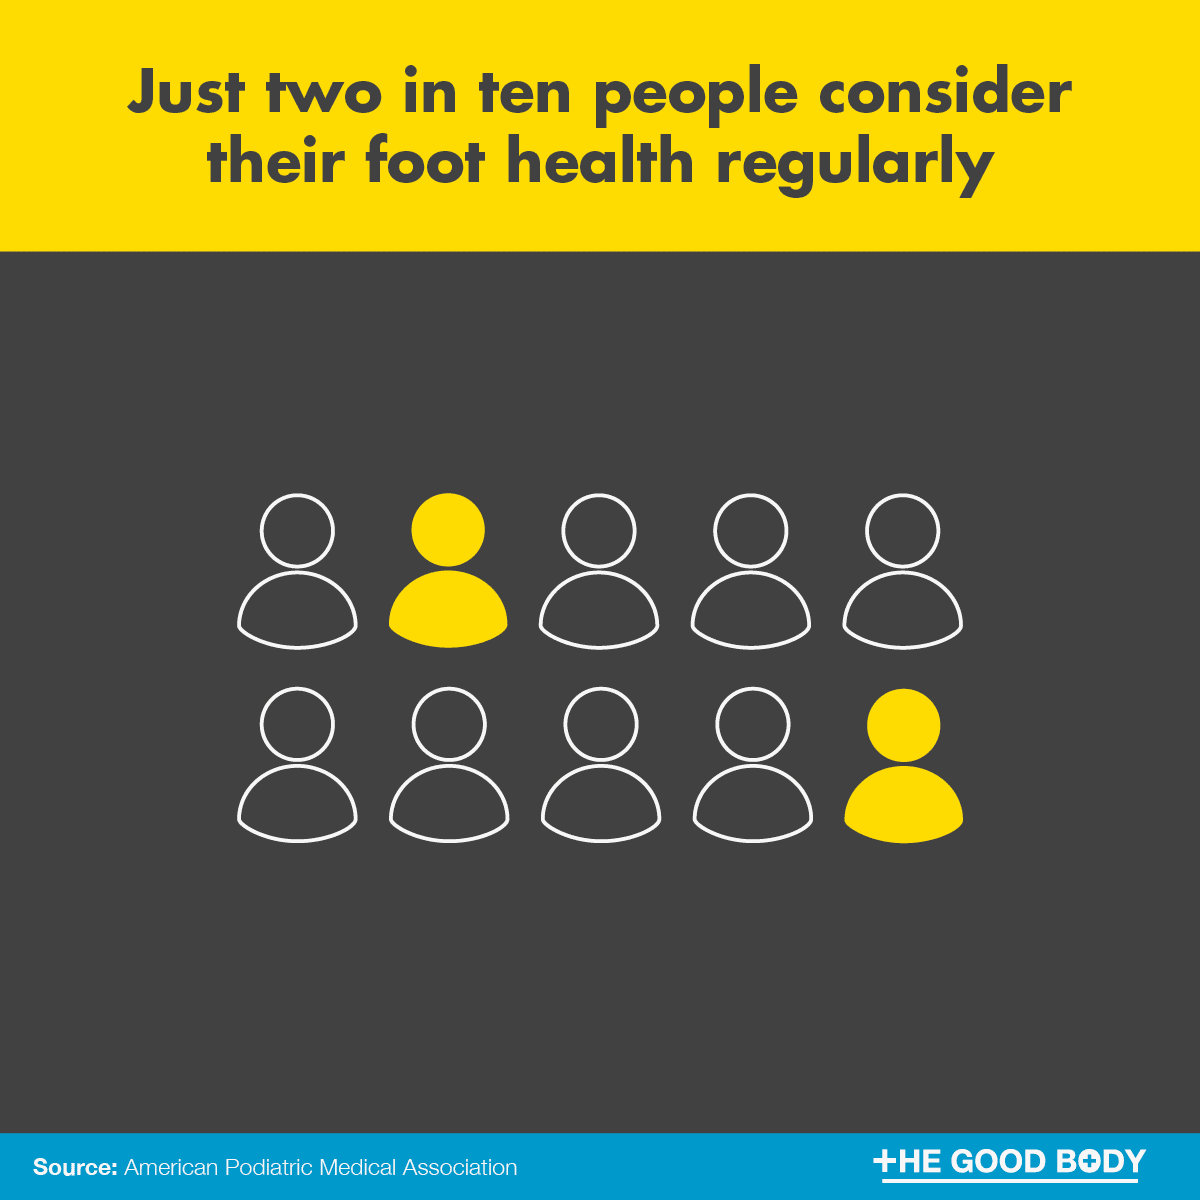 Just two in ten people consider their foot health regularly